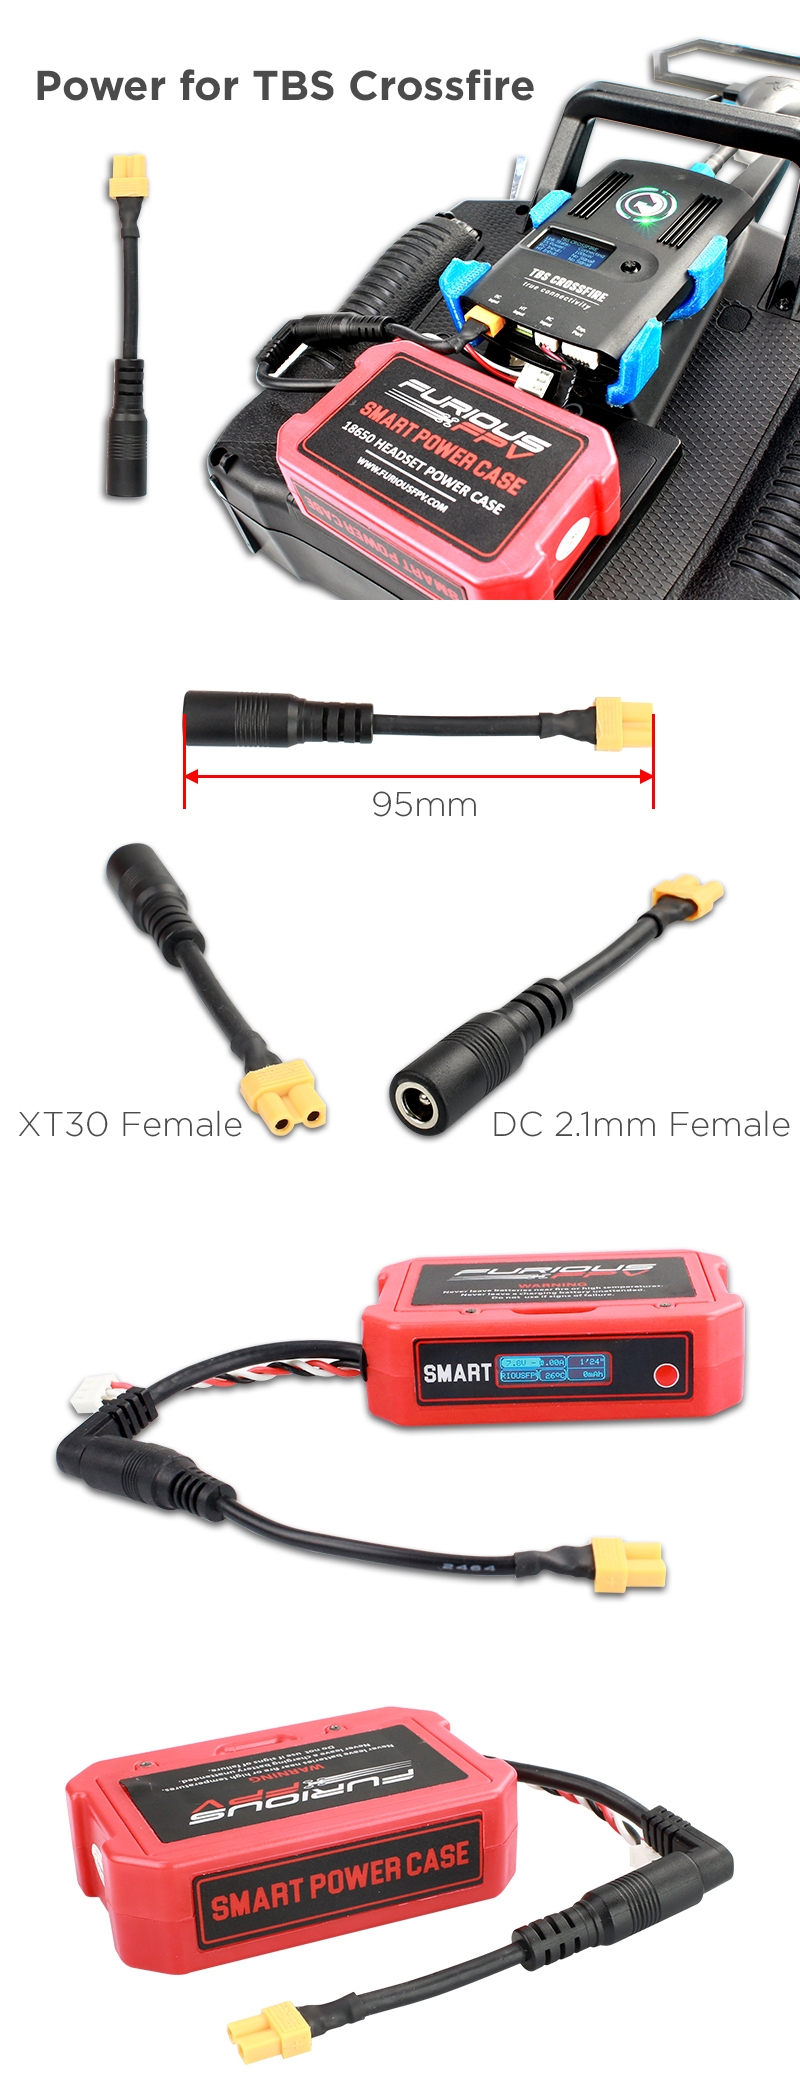 FuriousFPV Power Cable 95mm With XT30 Female and DC 2.1mm Female Plug For SPC-TBS Crossfire TX